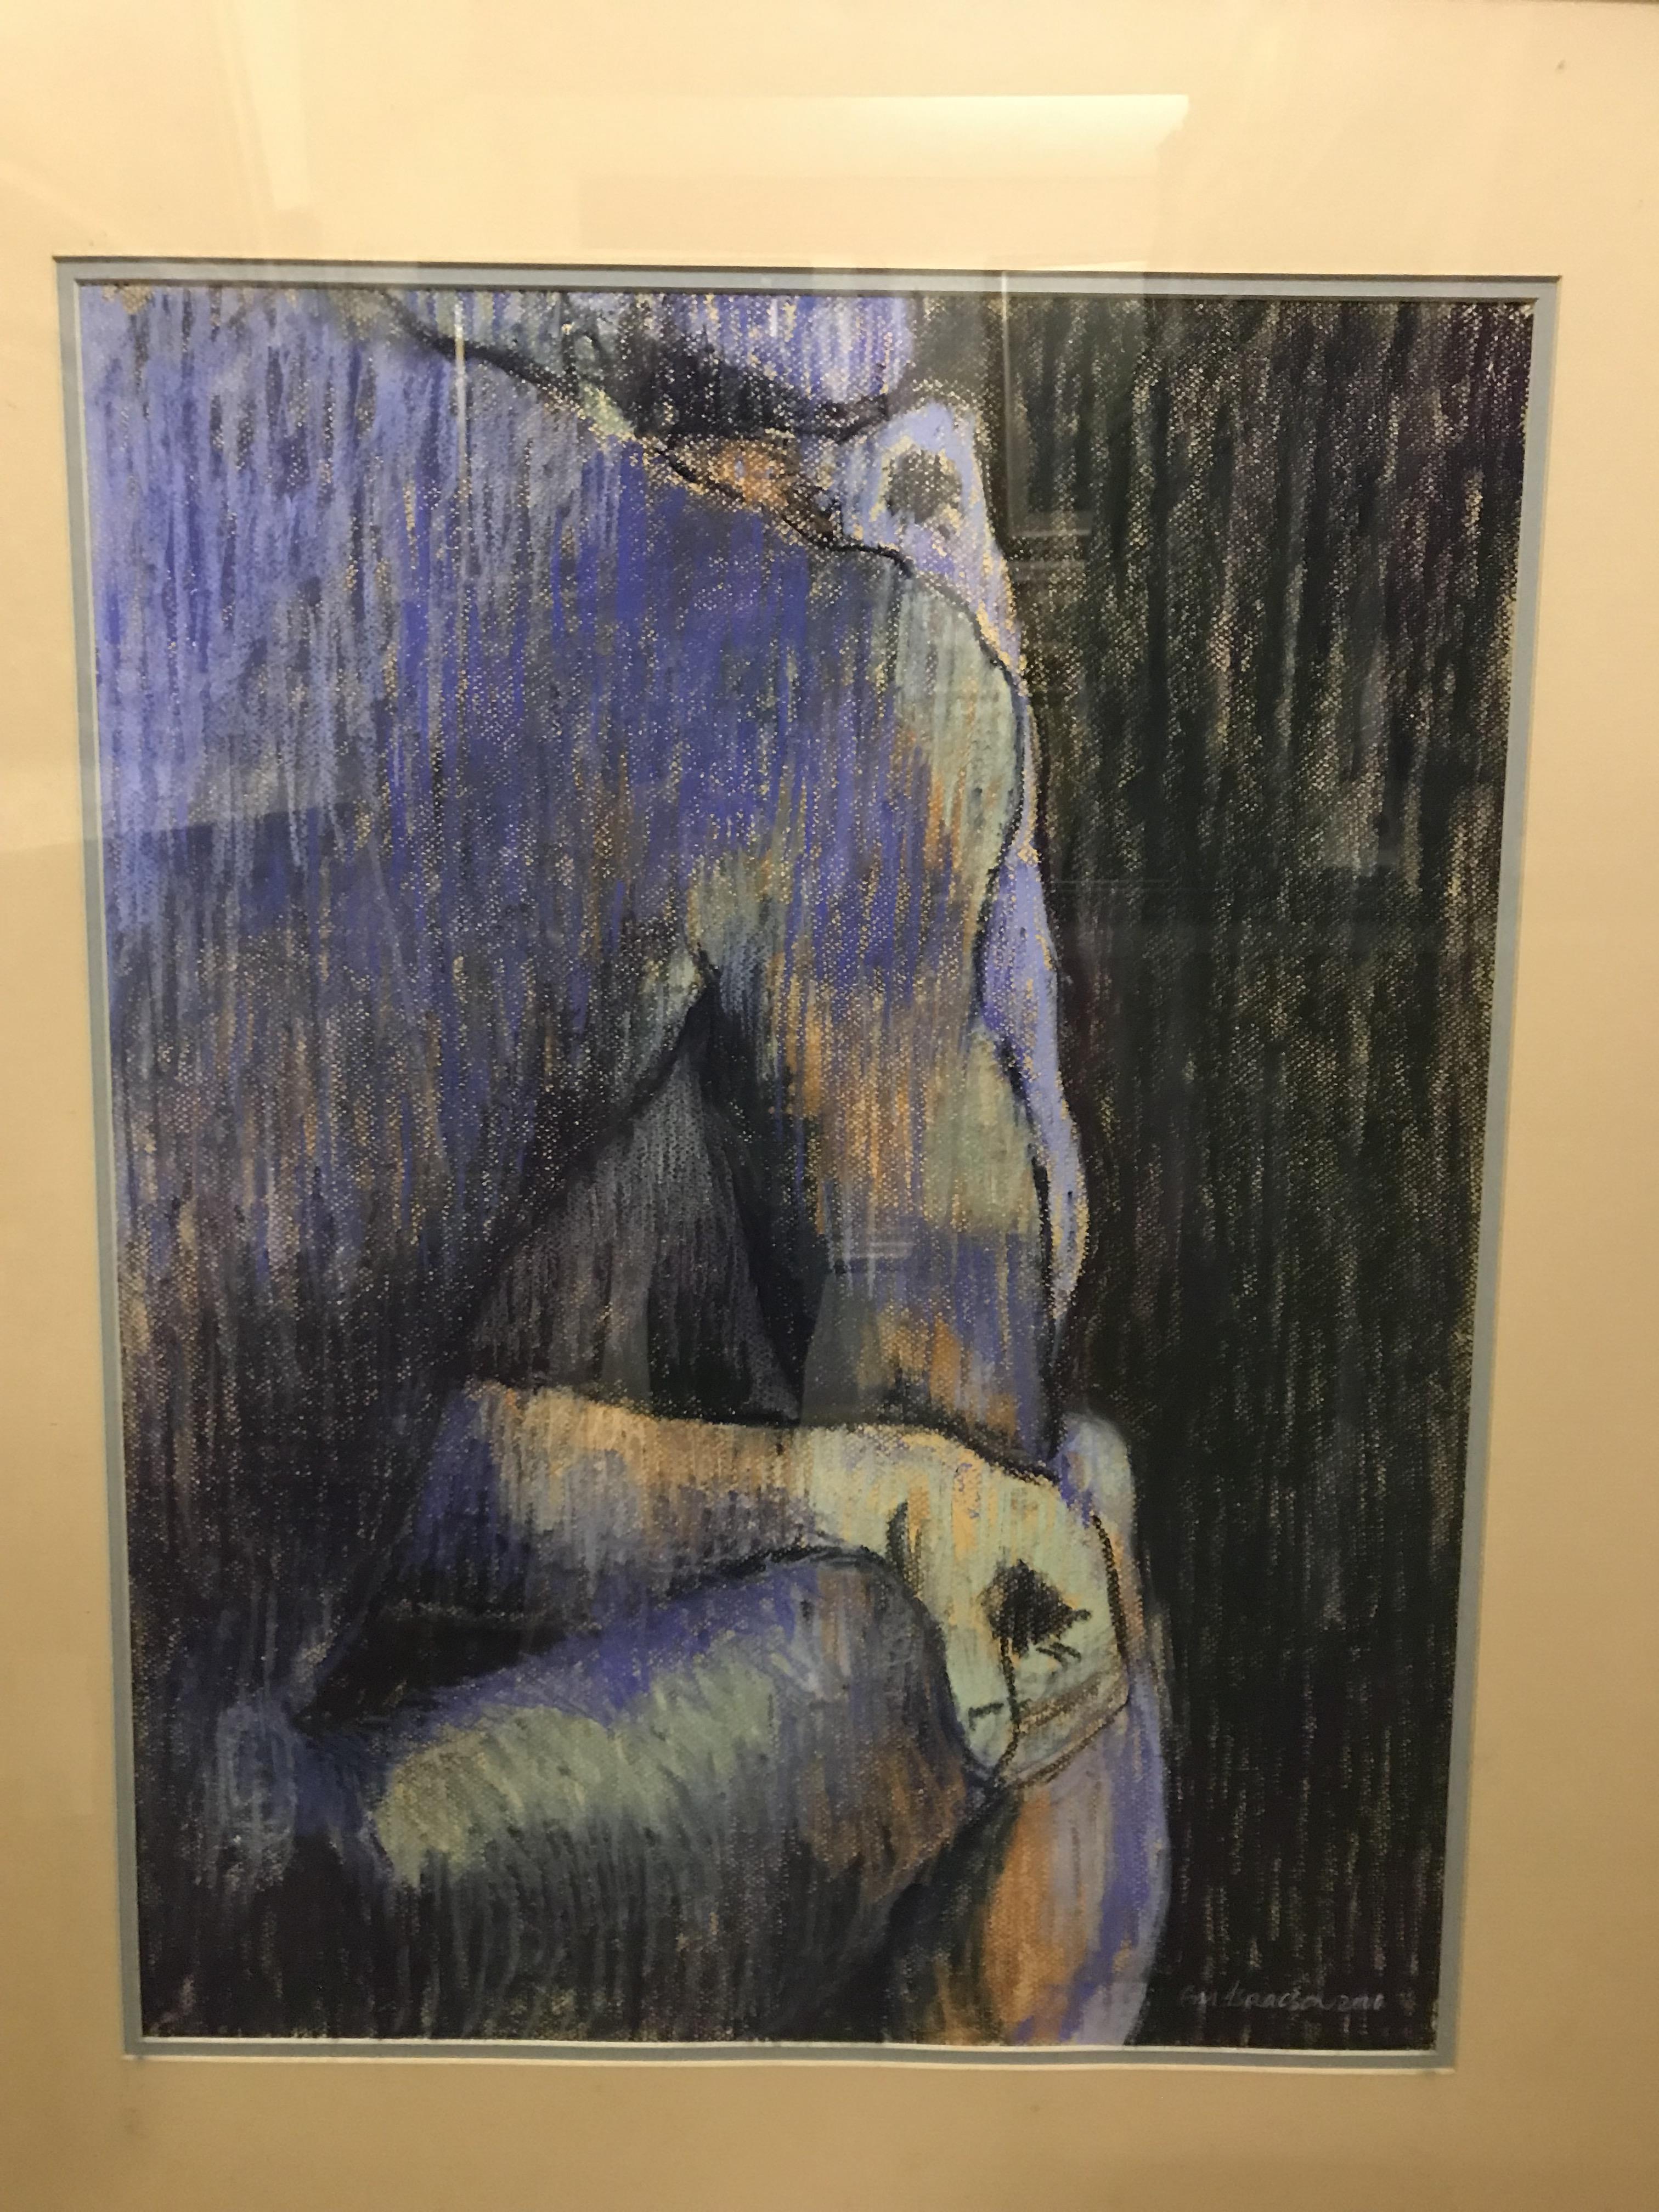 M ISAACSON "Nude study", pastel, signed lower left, dated 2000, 63. - Image 2 of 4